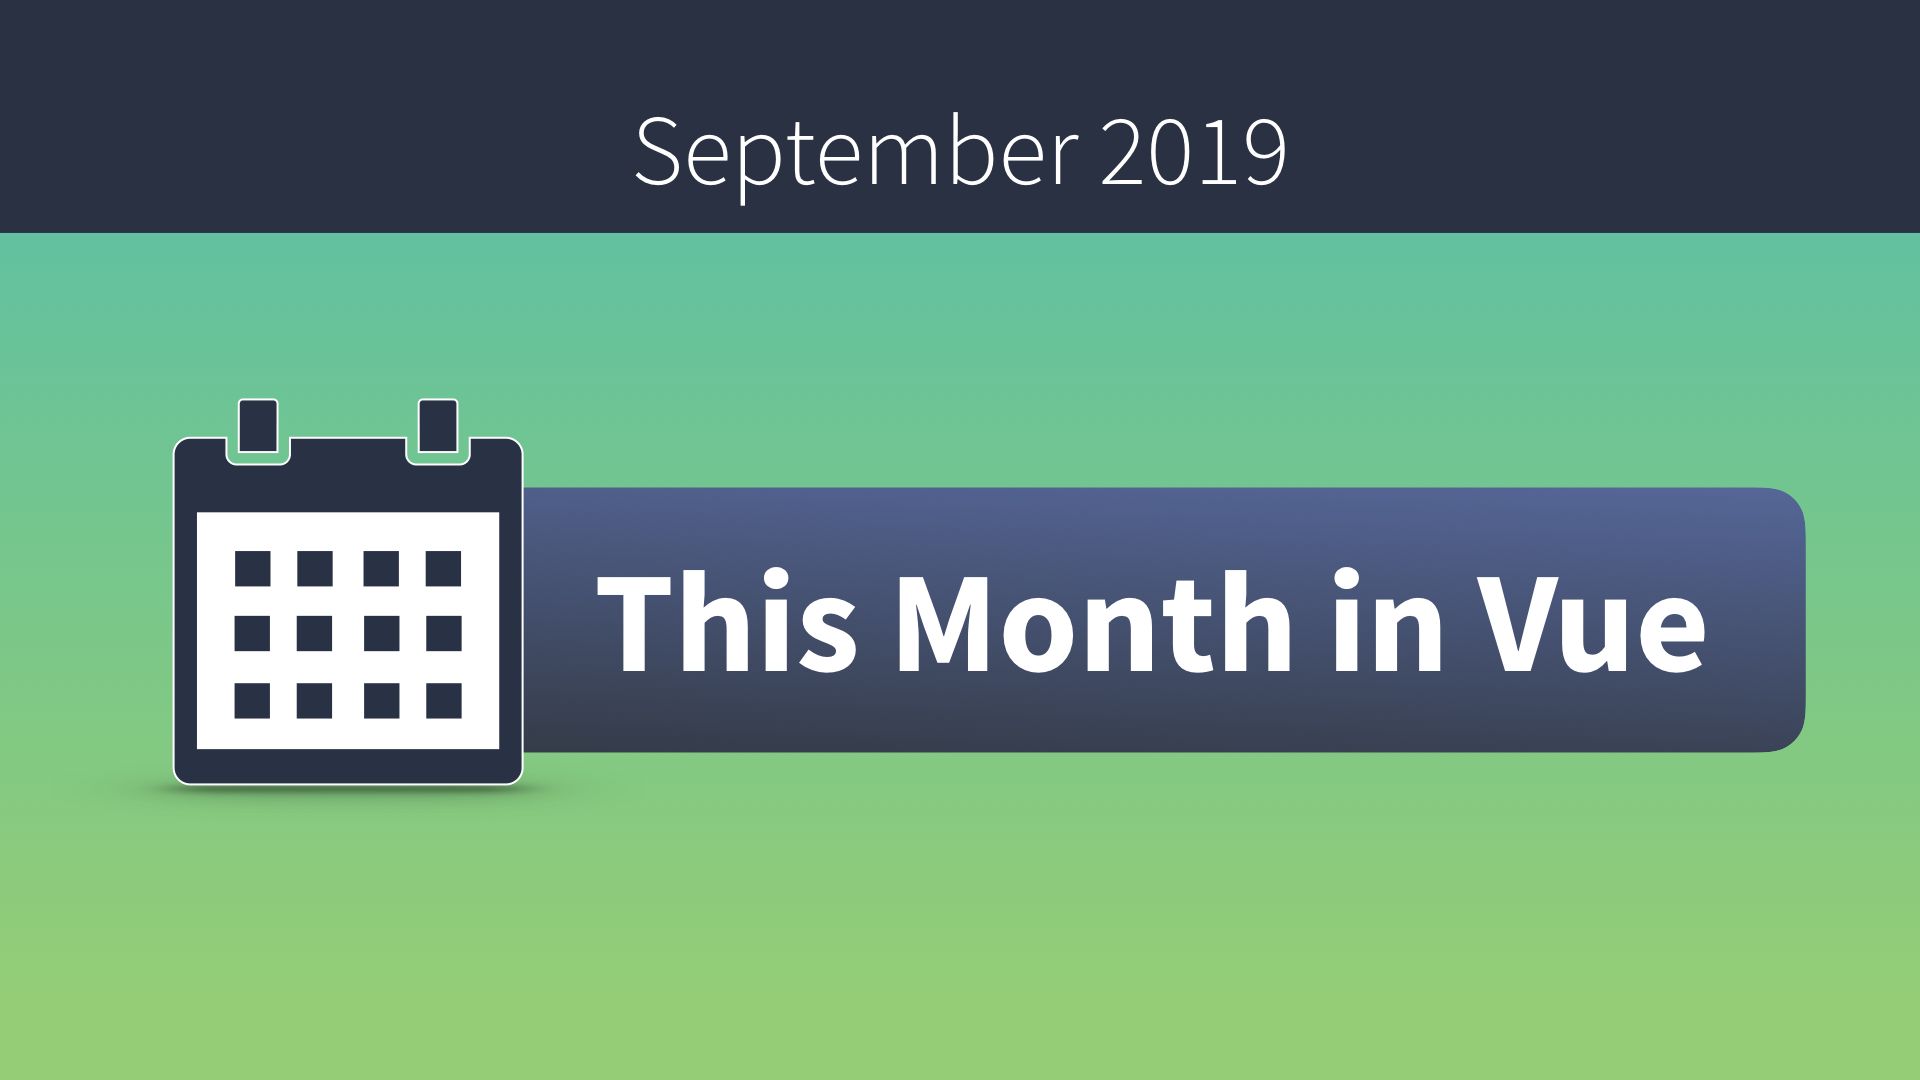 This Month in Vue - September 2019